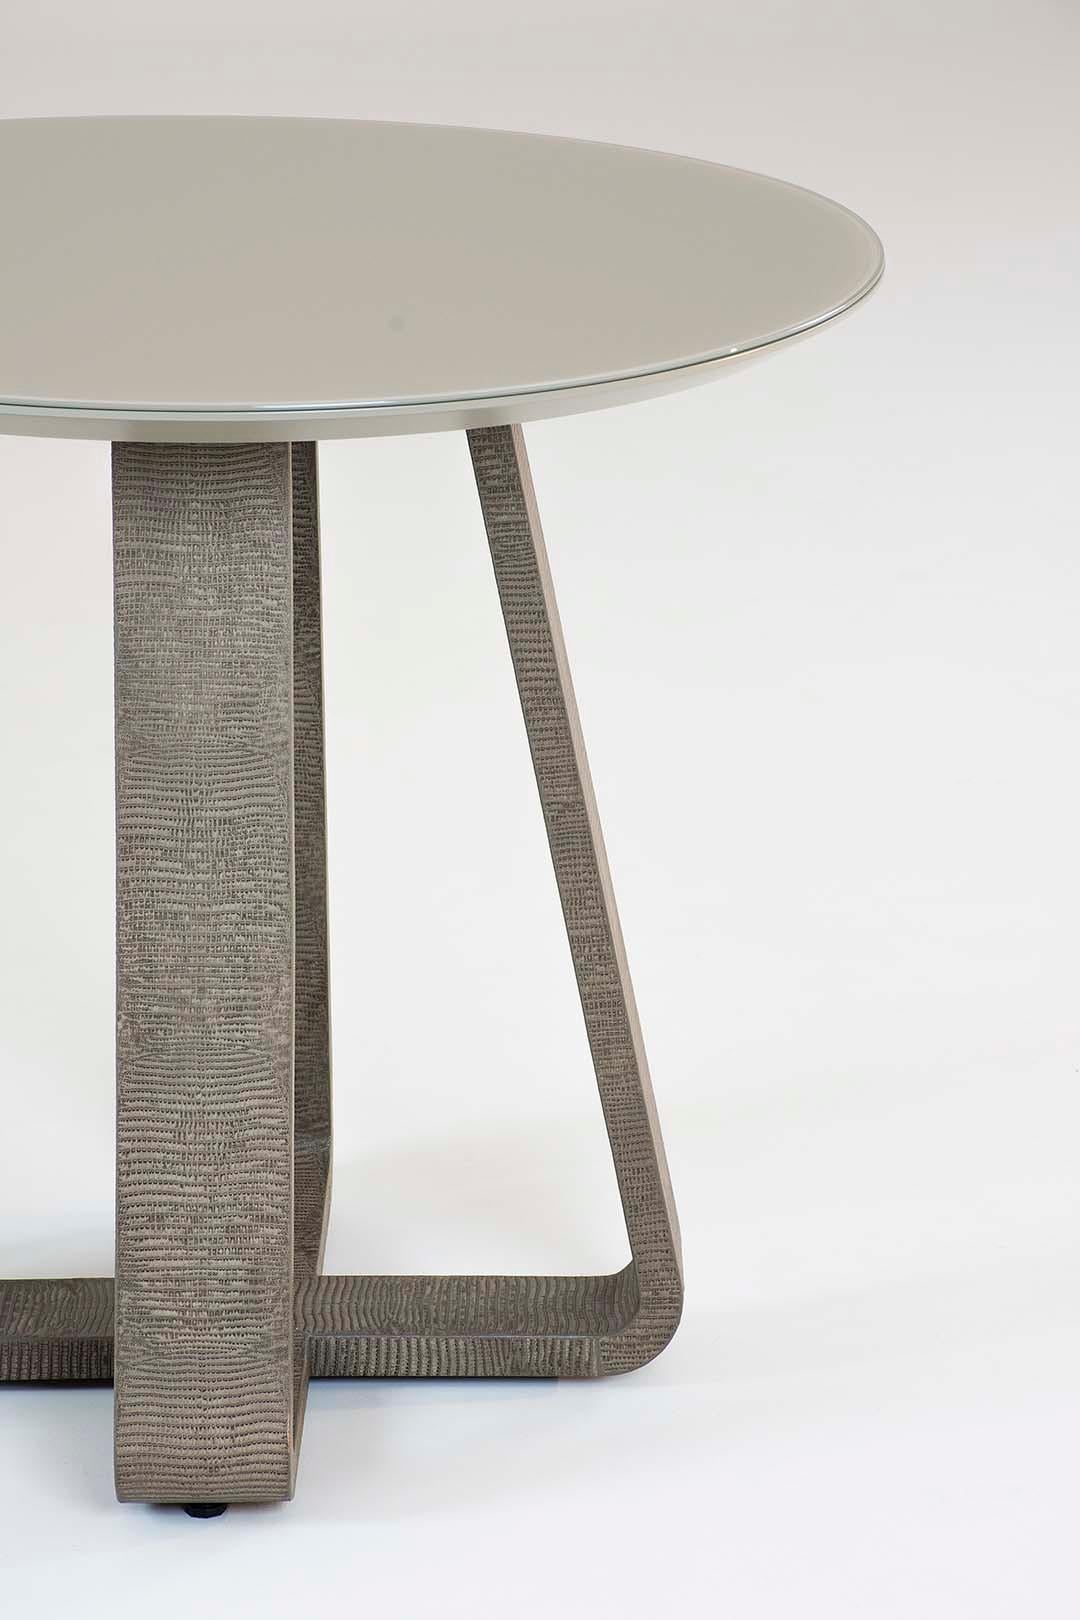 The Traviata Side Table has a design that combines the mirrored top and mdf with leather coating, creating a harmony that stands out in any composition.

A useful and practical item in addition to, of course, adding a more charming touch to the